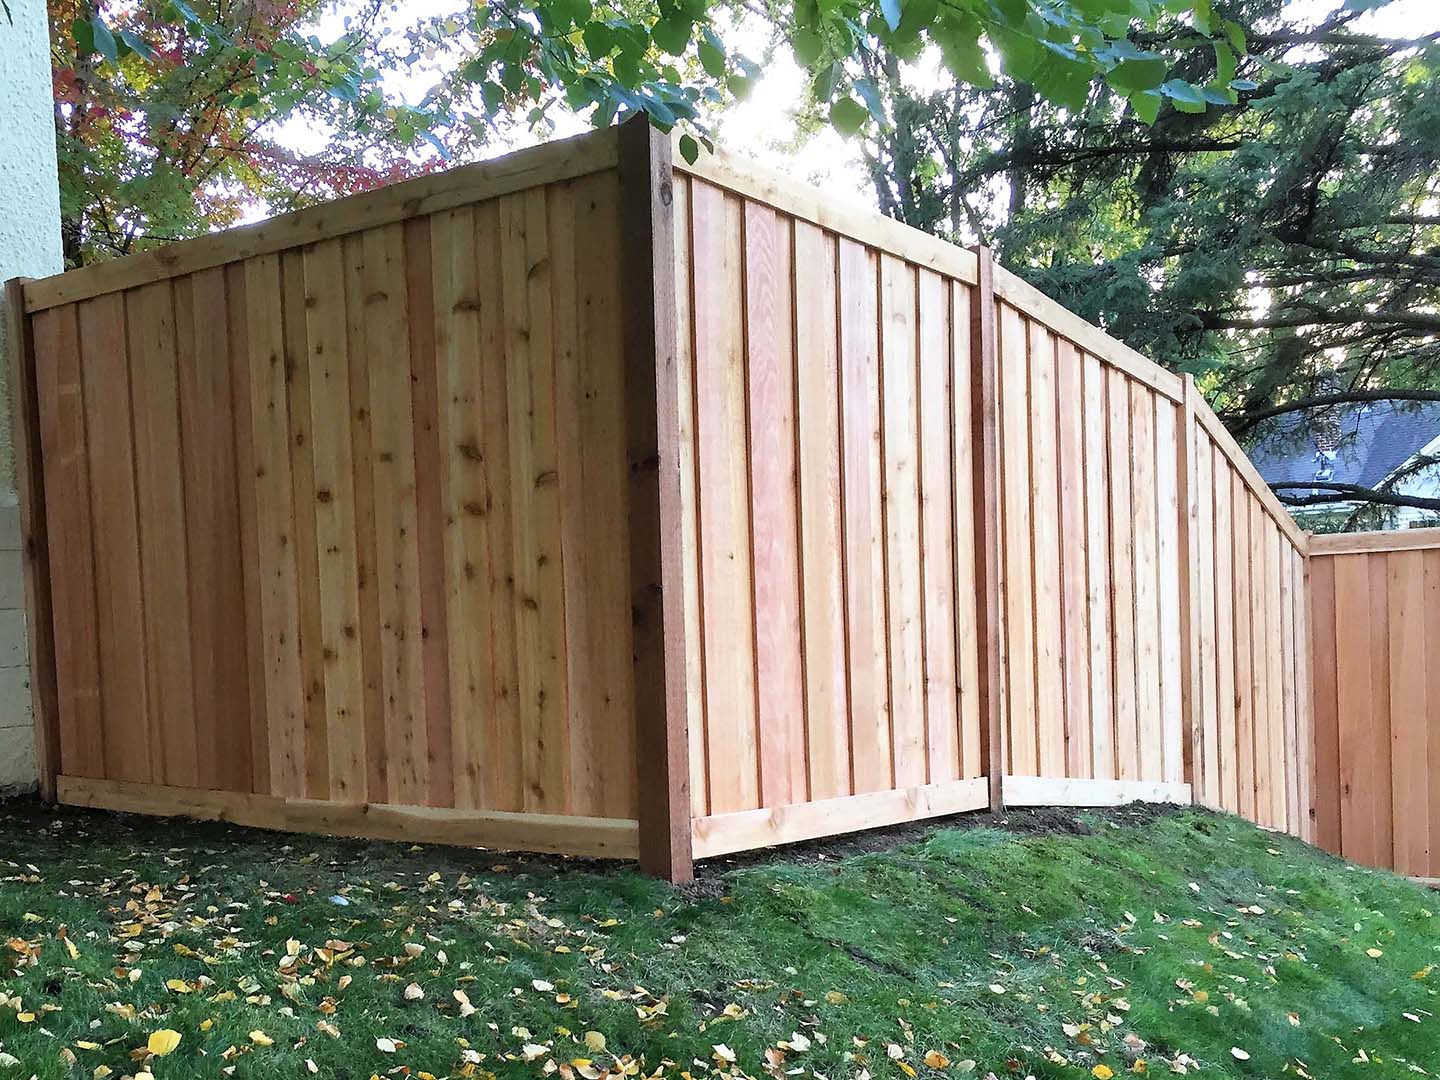 Centerville MN cap and trim style wood fence